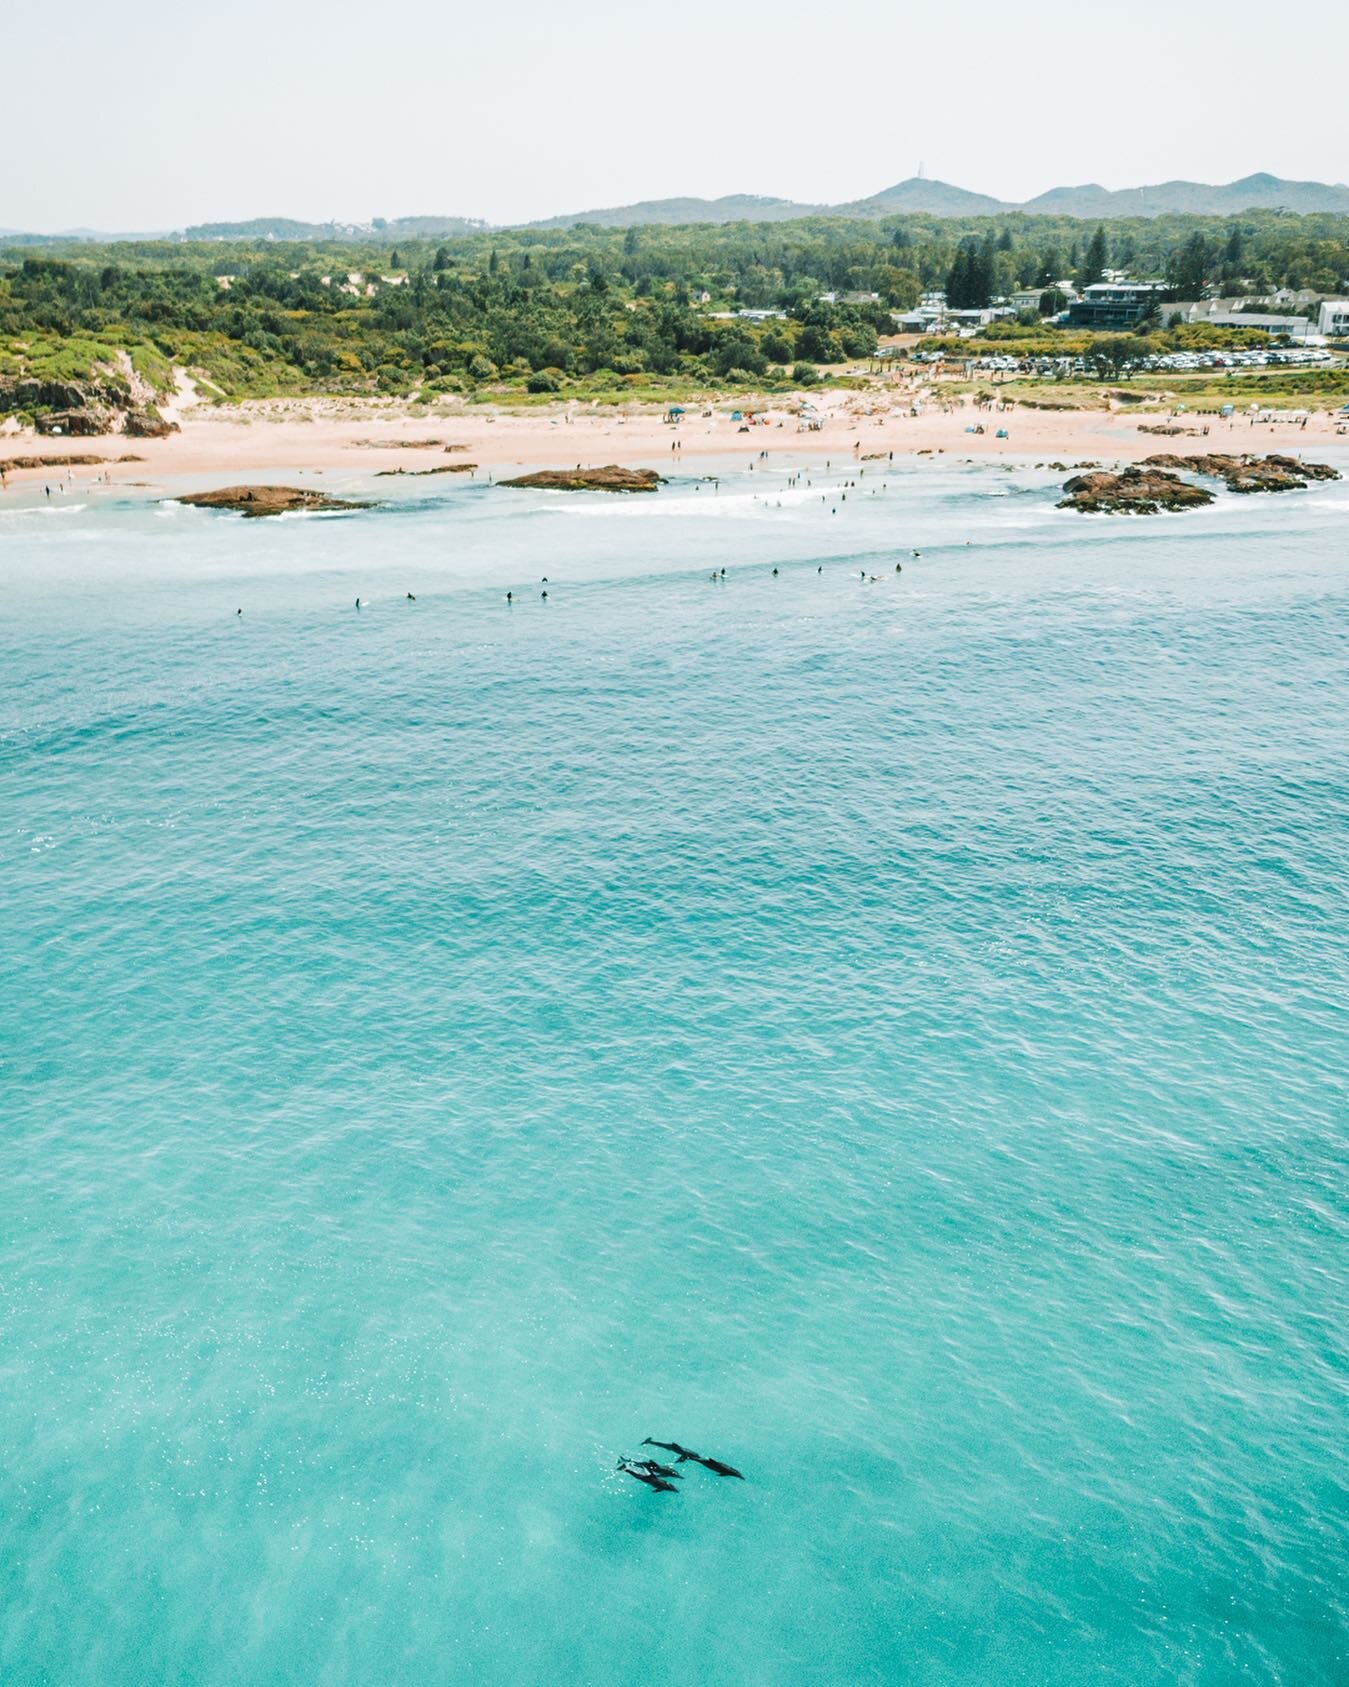 The crystal clear waters of @portstephens 🐬
.
.
.
#portstephens #nsw #birubibeach #visitnsw #visualsofearth #droneofficial #dronebois #gameofdronez #australia #seeaustralia #northcoastnsw #dolphins🐬 #surfingphotography #incrediblebynature #aerialvi